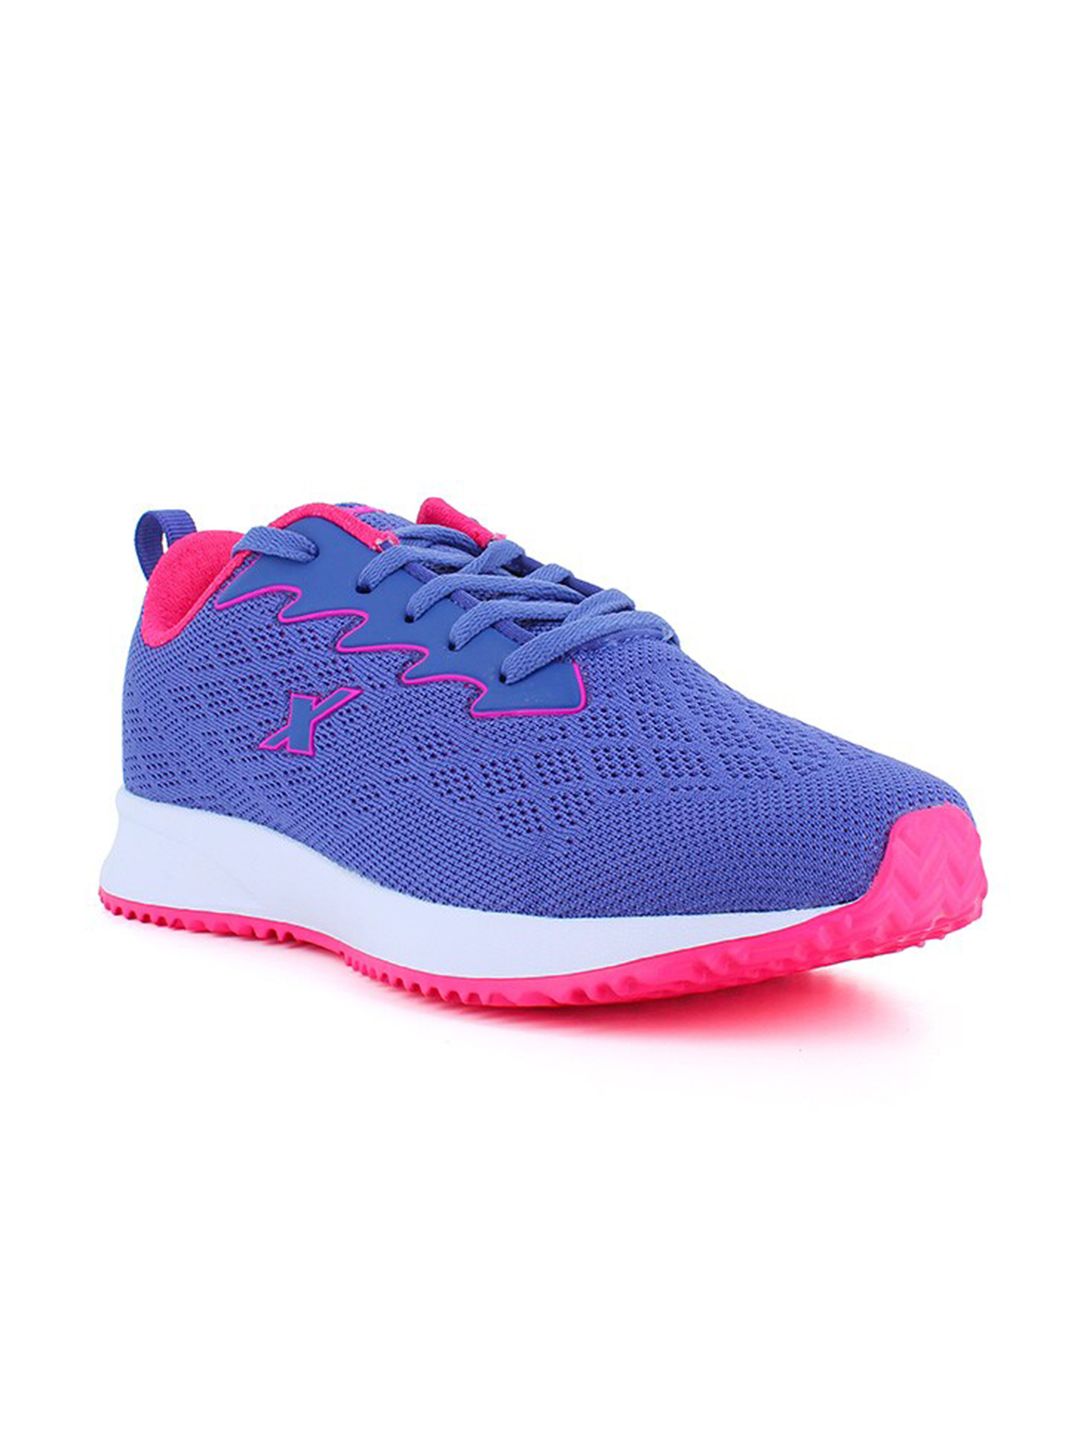 Sparx Women Blue Textile Running Non-Marking Shoes Price in India